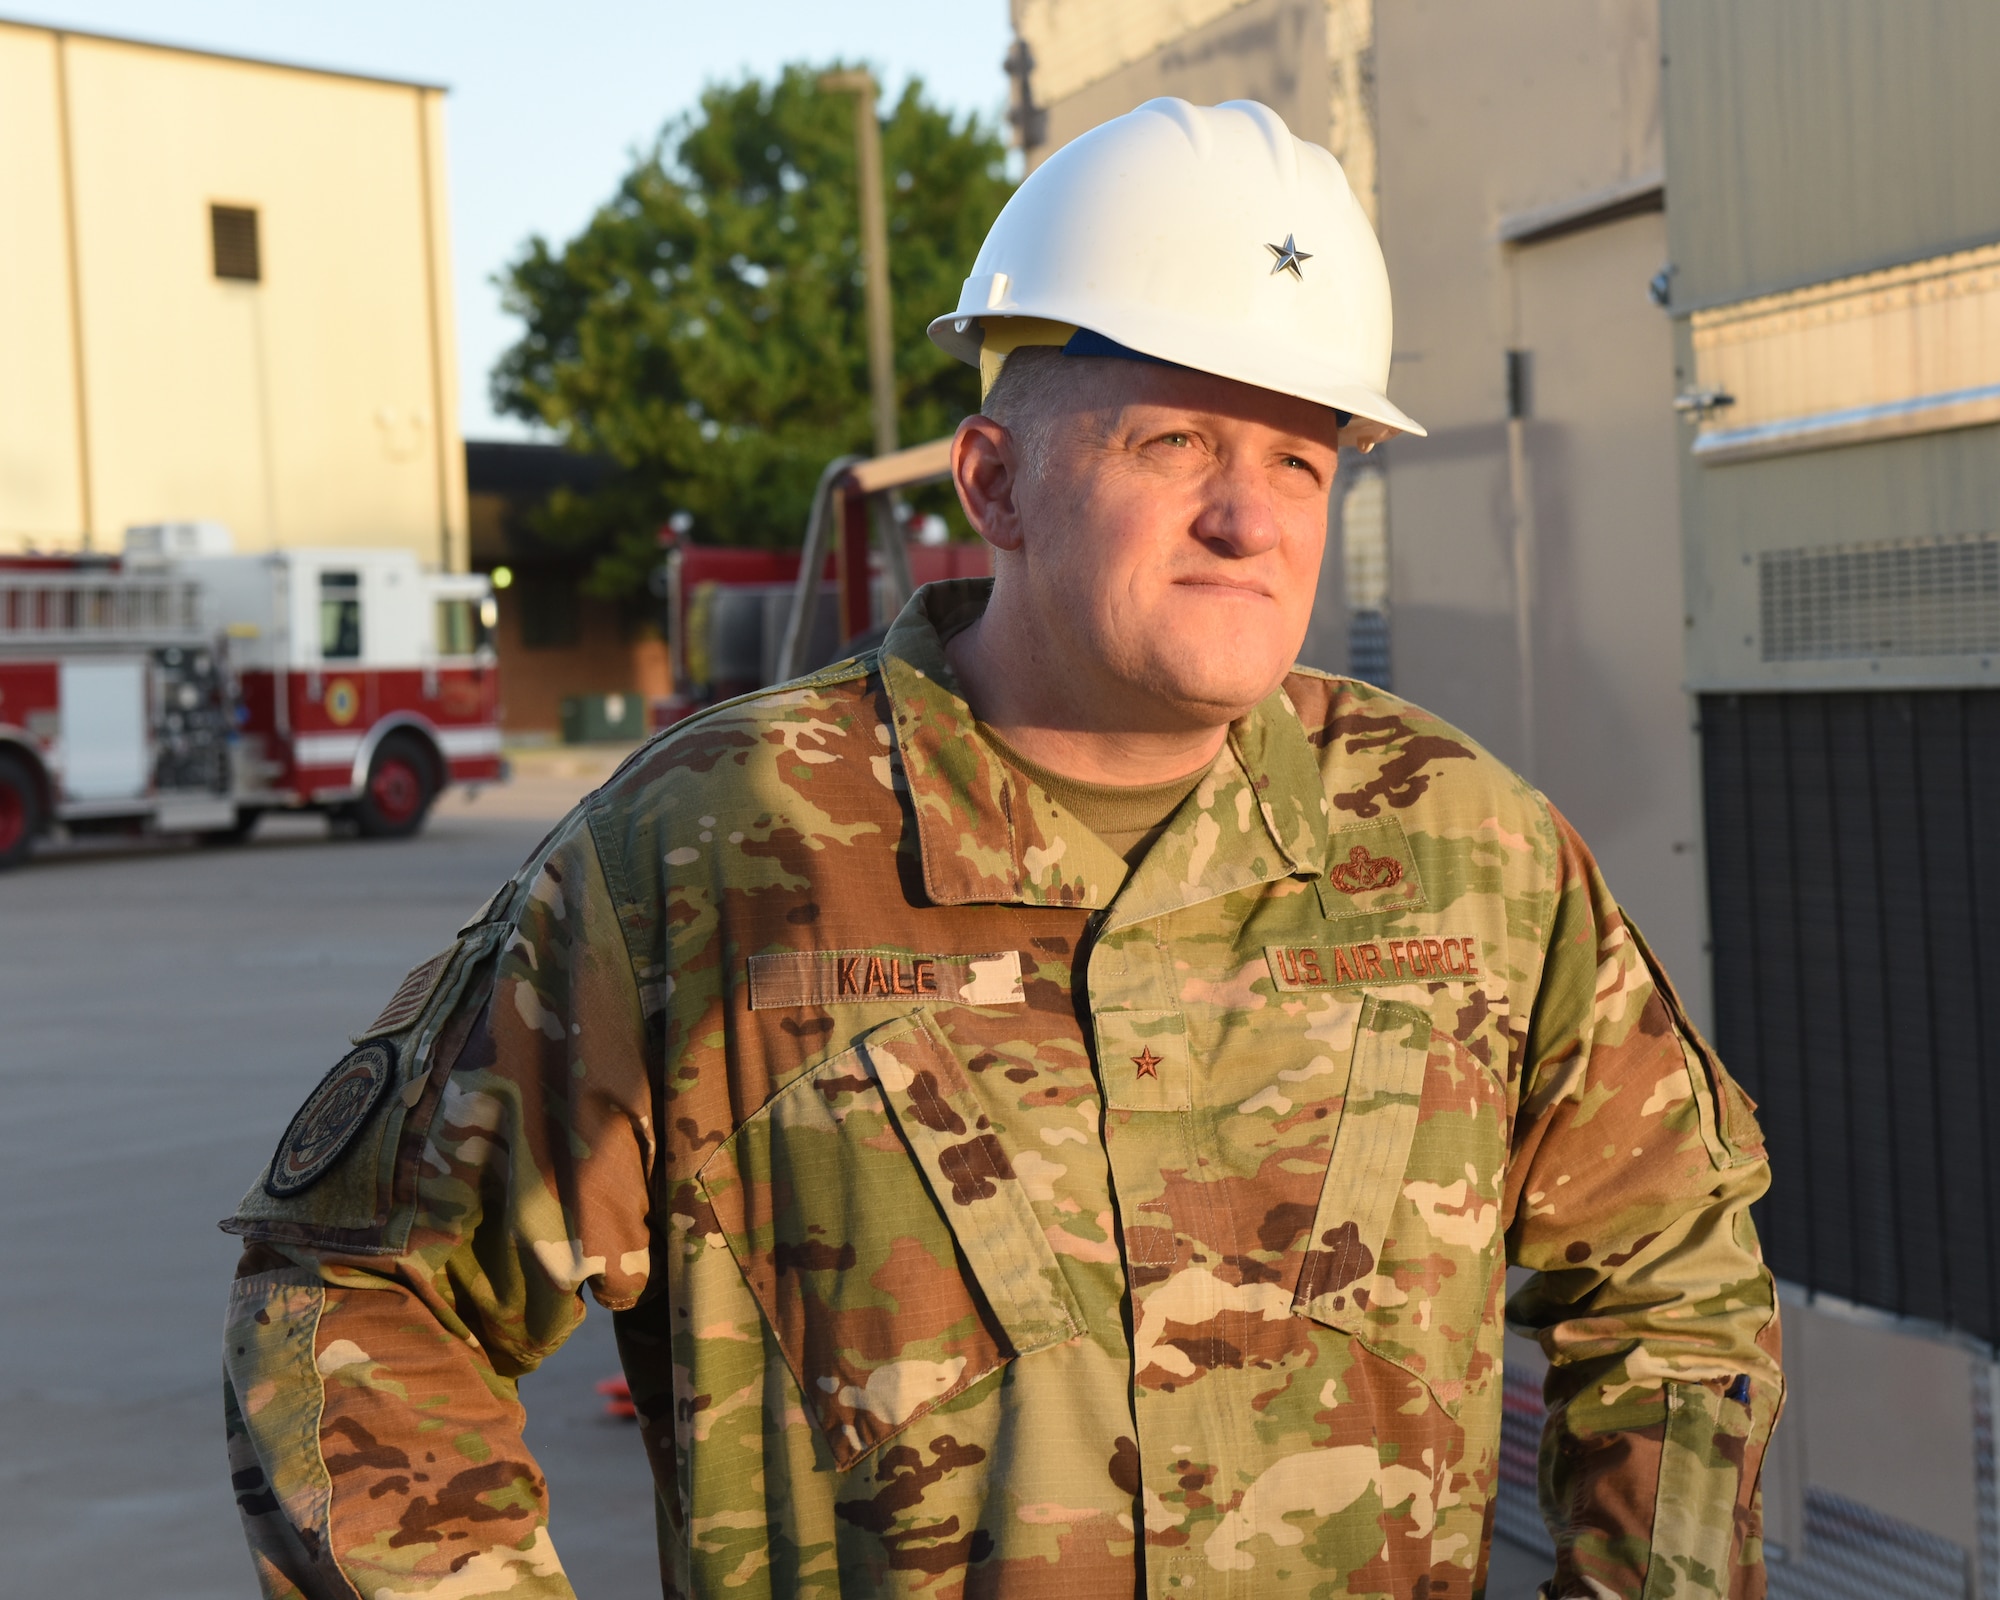 U.S. Air Force Brig. Gen. William Kale III, Air Force Director of Civil Engineers, watches as 312th Training Squadron students perform ladder training at Goodfellow Air Force Base, Texas, June 23, 2022. During his visit, Kale toured Goodfellow’s facilities and observed fire protection training.  (U.S. Air Force photo by Airman 1st Class Zachary Heimbuch)